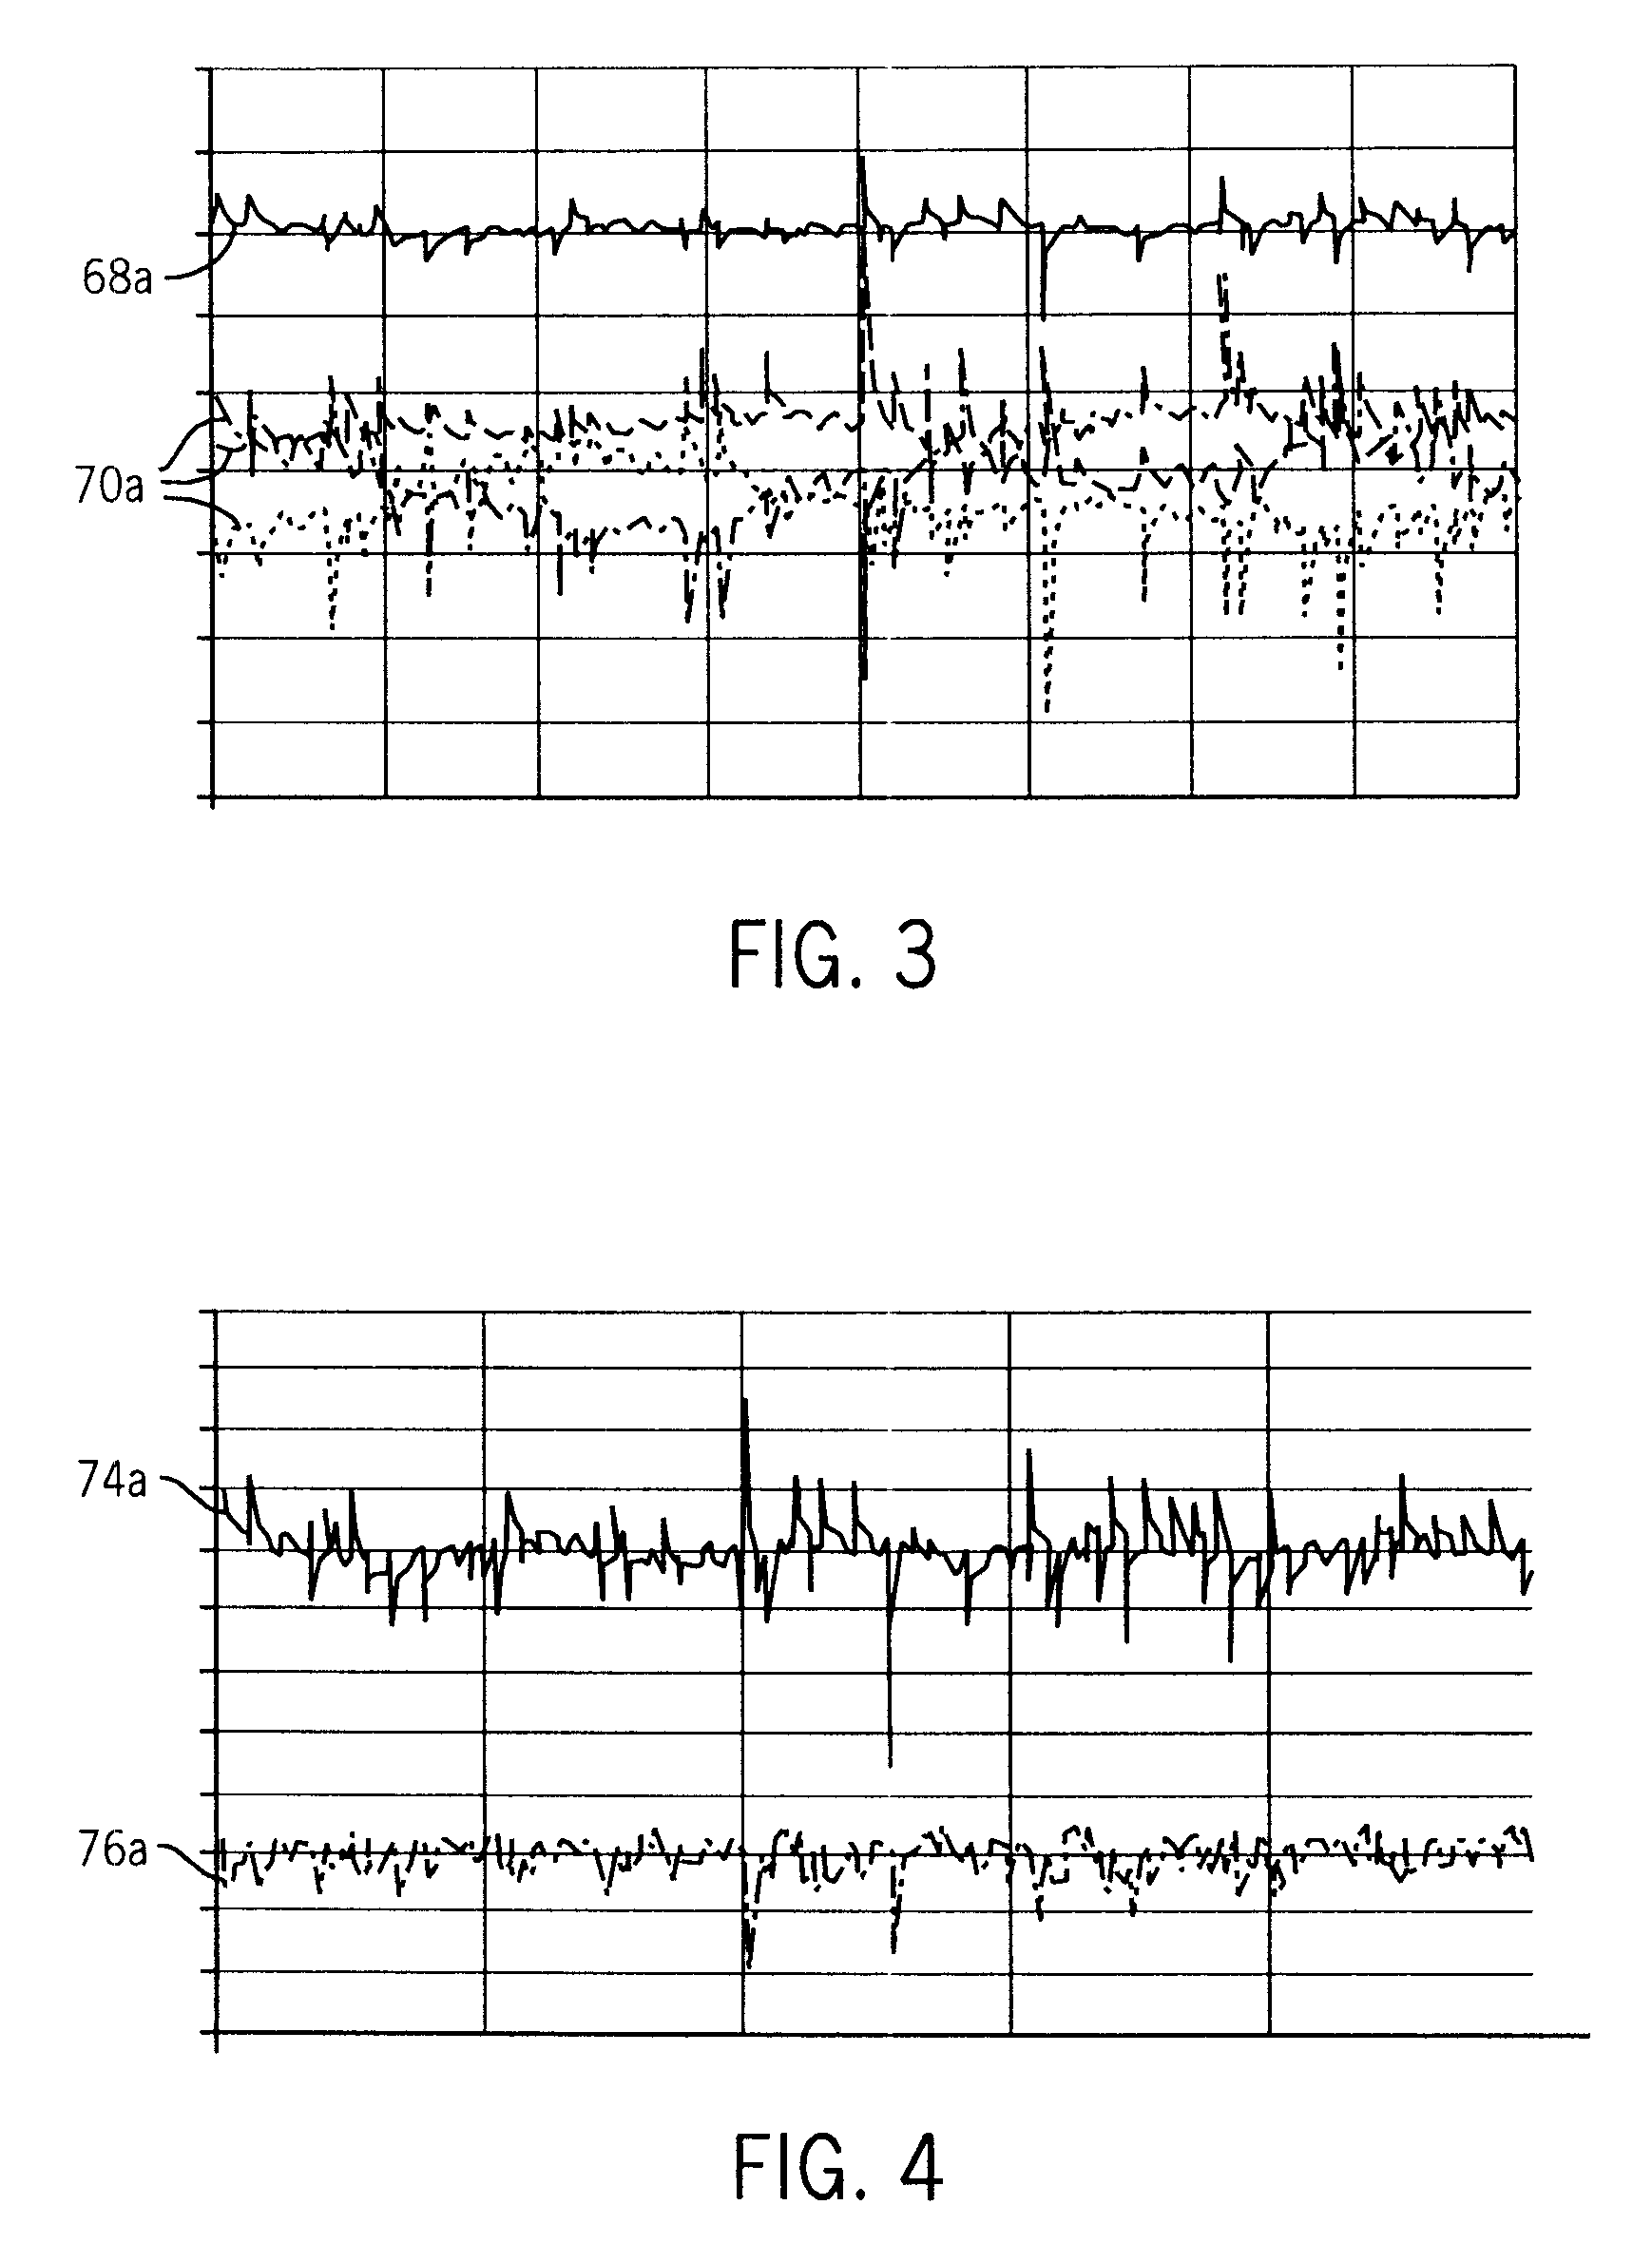 Method and apparatus for synchronized parallel operation of PWM inverters with limited circulating current